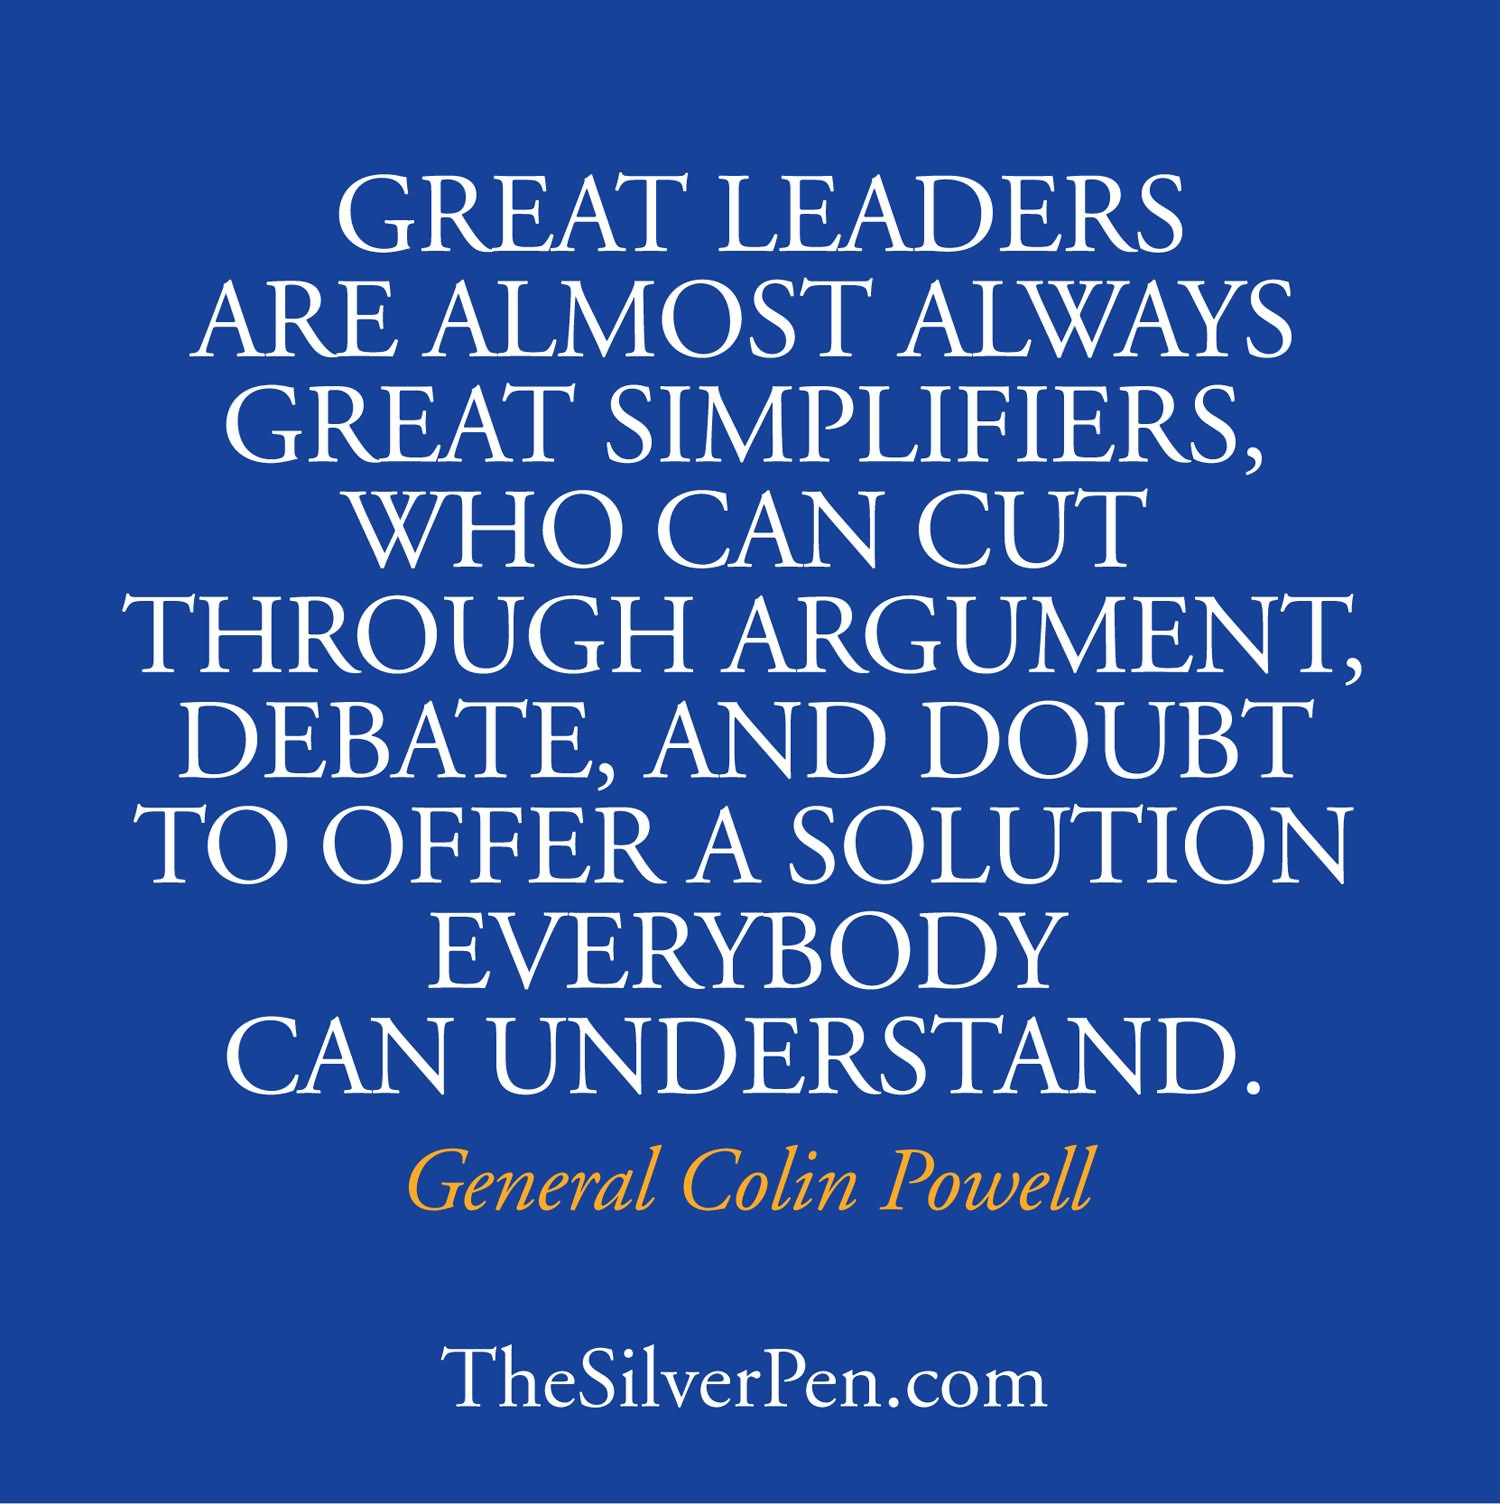 Great leaders are almost always great simplifiers, who can cut through argument, debate and doubt, to offer a solution everybody can understand. - General Colin Powell